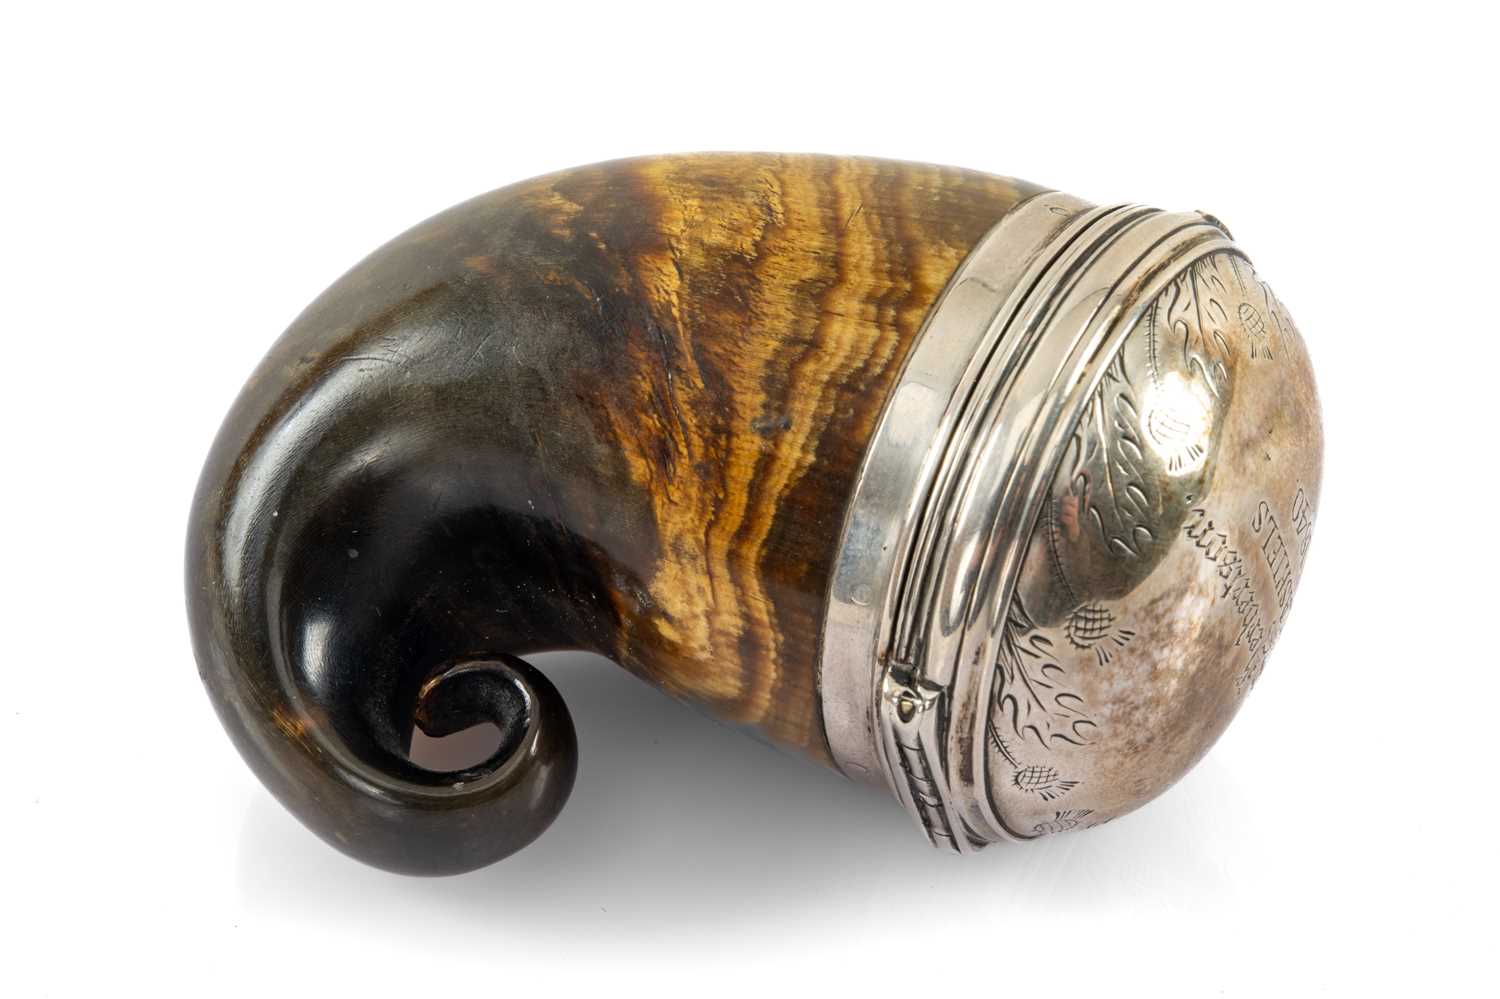 19TH CENTURY SCOTTISH HORN SNUFF MULL with applied white metal hinged cap, engraved 'Adam Herbertson